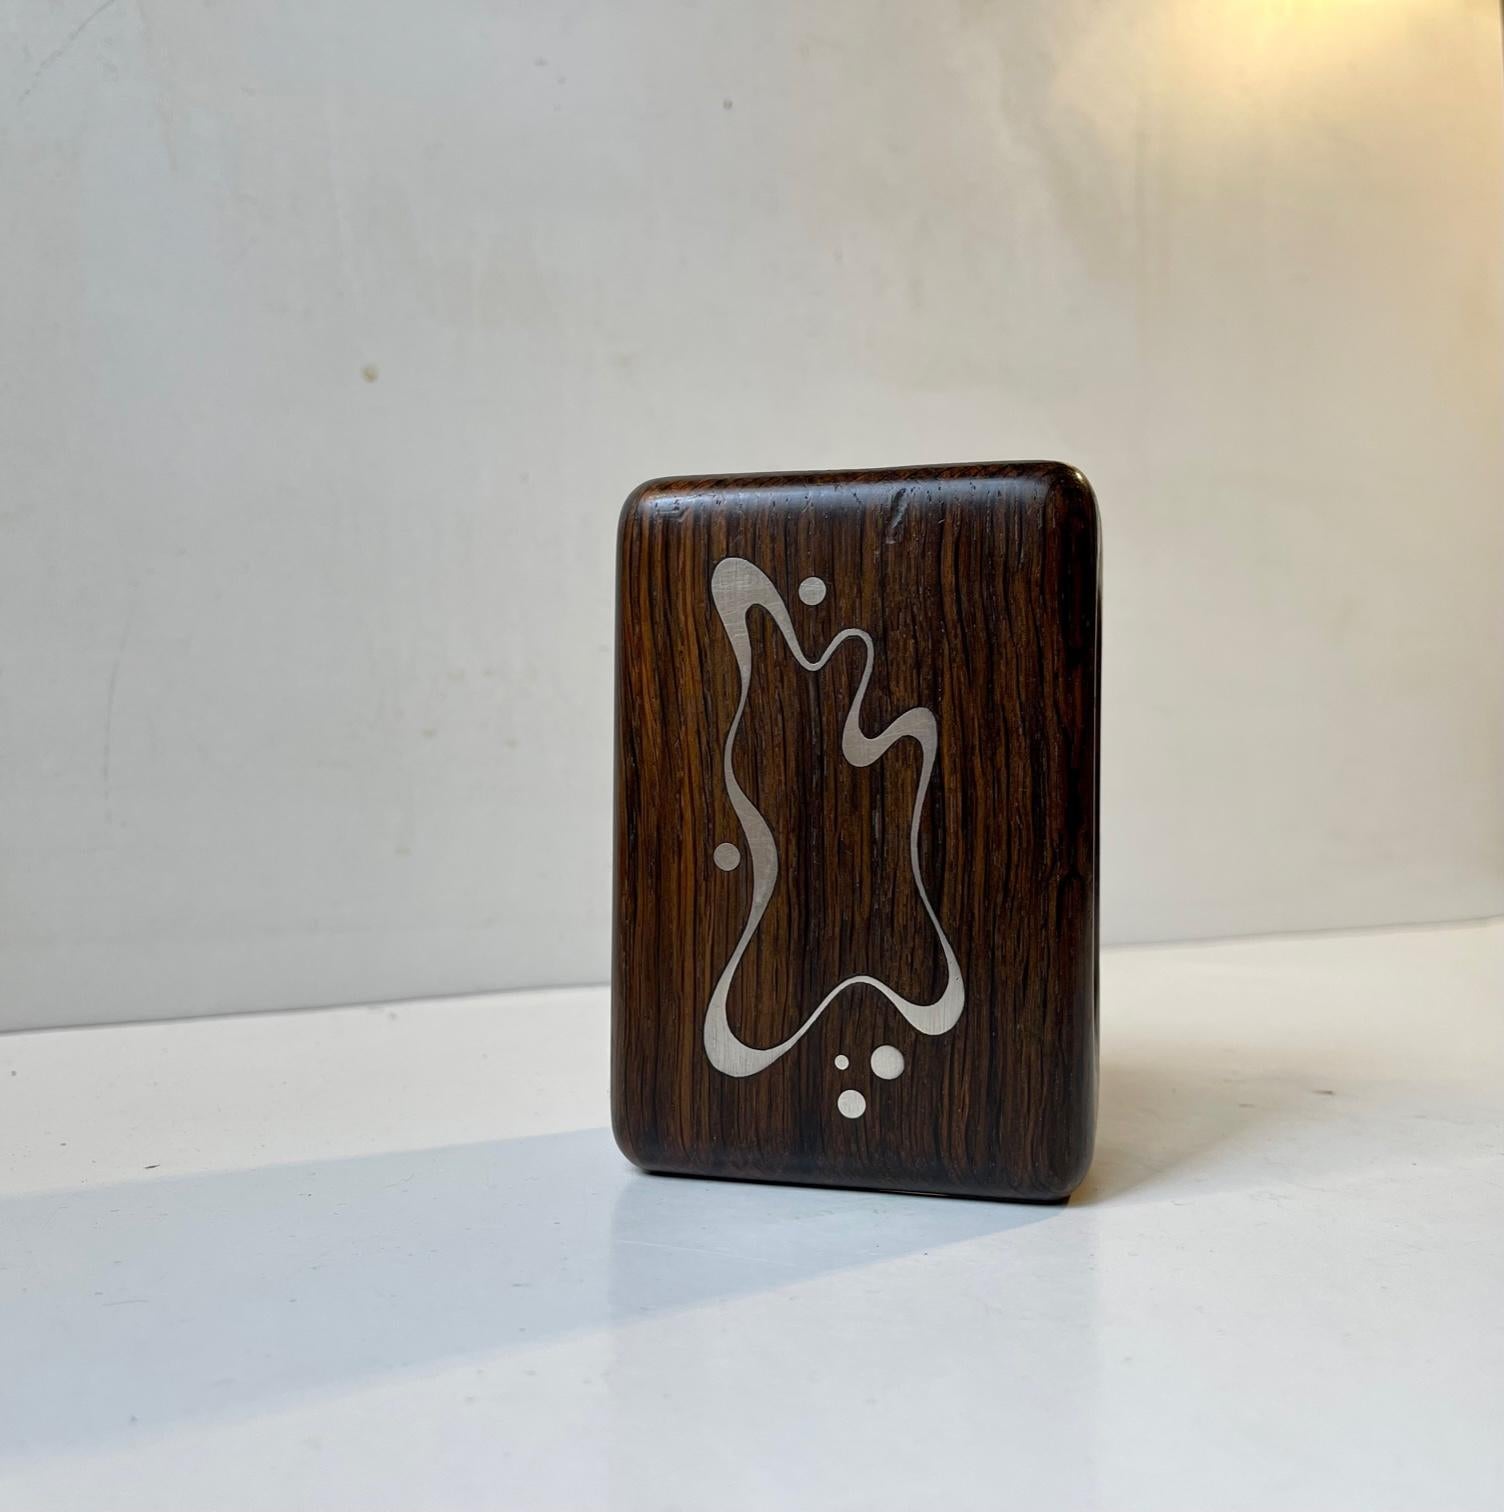 Copenhagen silversmith Axel Salomonsen made a variety of rosewood accessories with sterling silver (925s) intarsia during the late 1950s and 60s. This matchbox holder in solid rosewood features an abstract modernist impression that has been inlaid